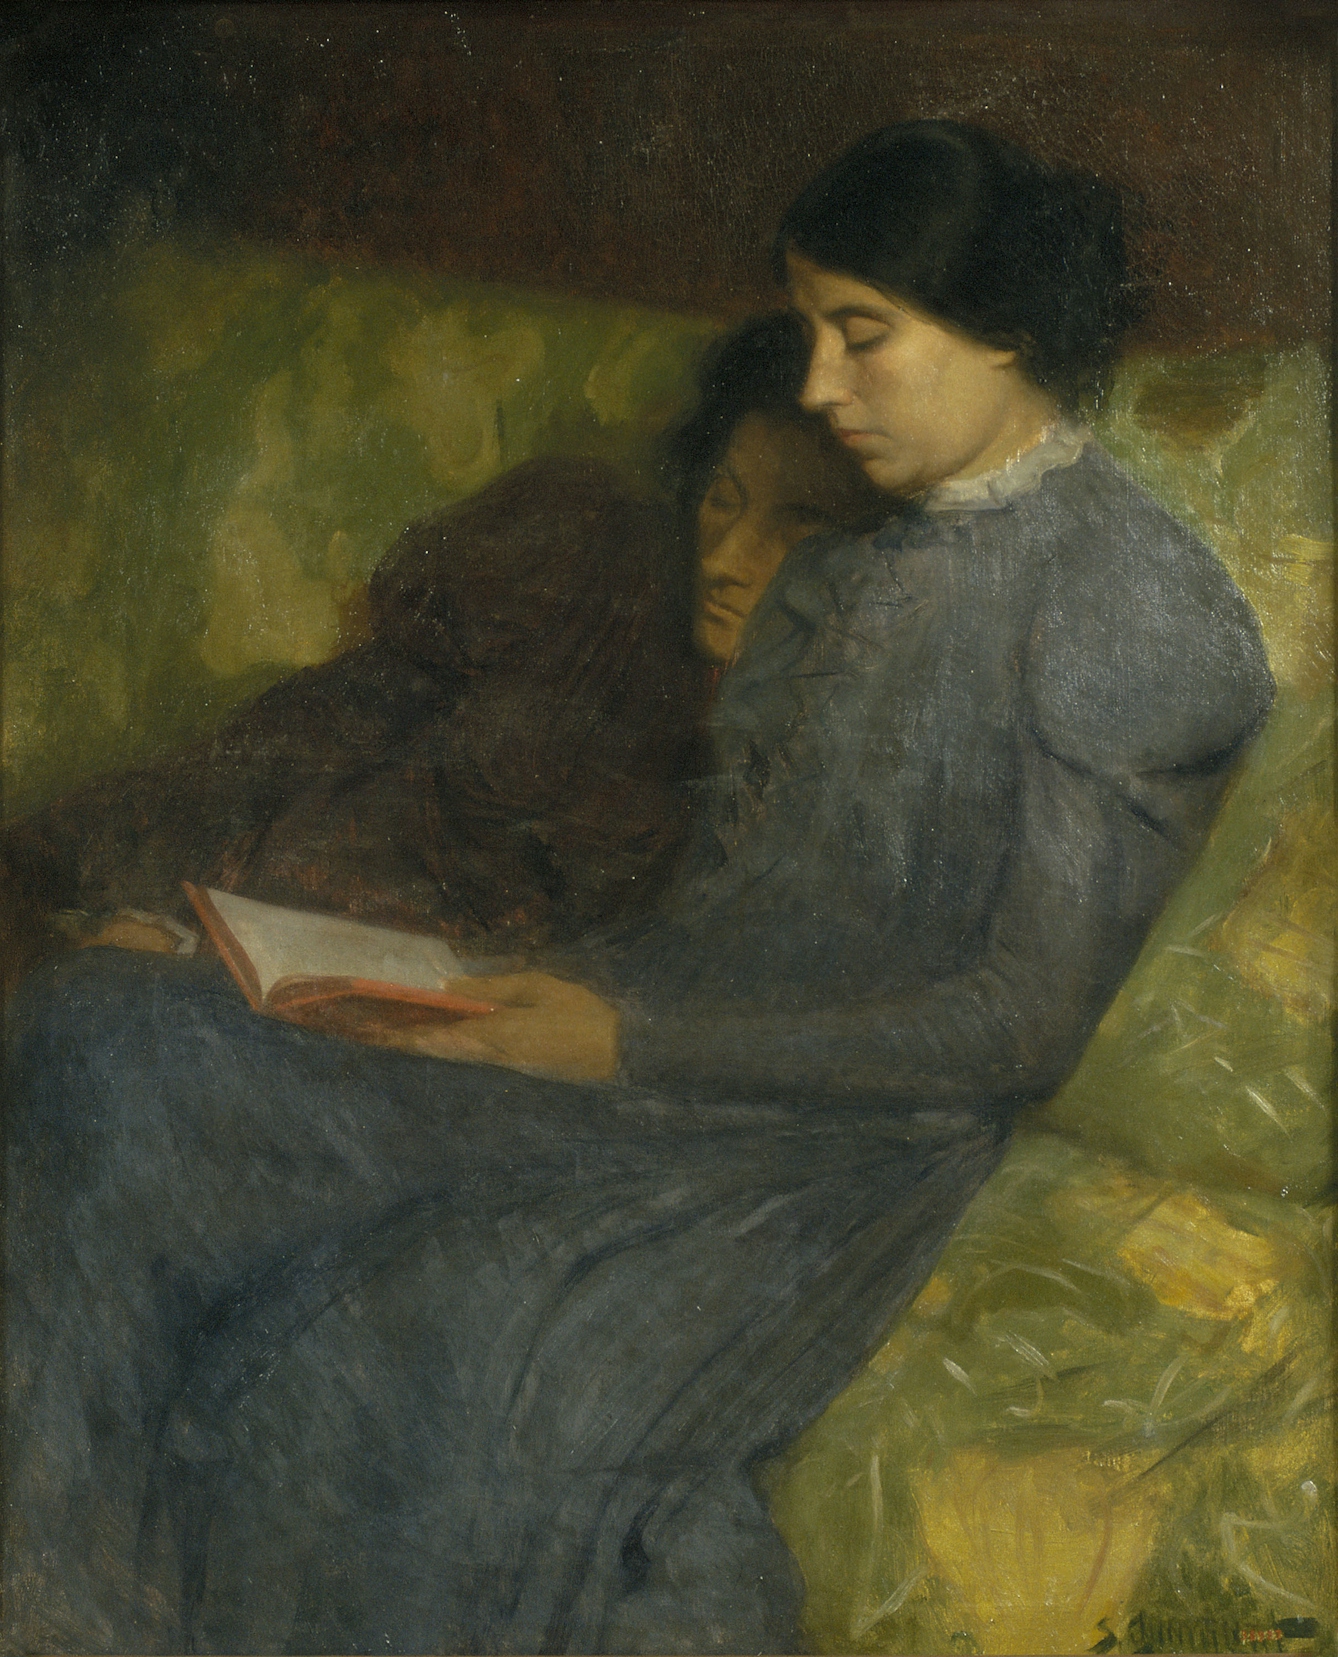 Oil painting depicting two women in long-sleeved long-skirted dark dresses sitting on a floral seat and leaning against each other and reading a book. 